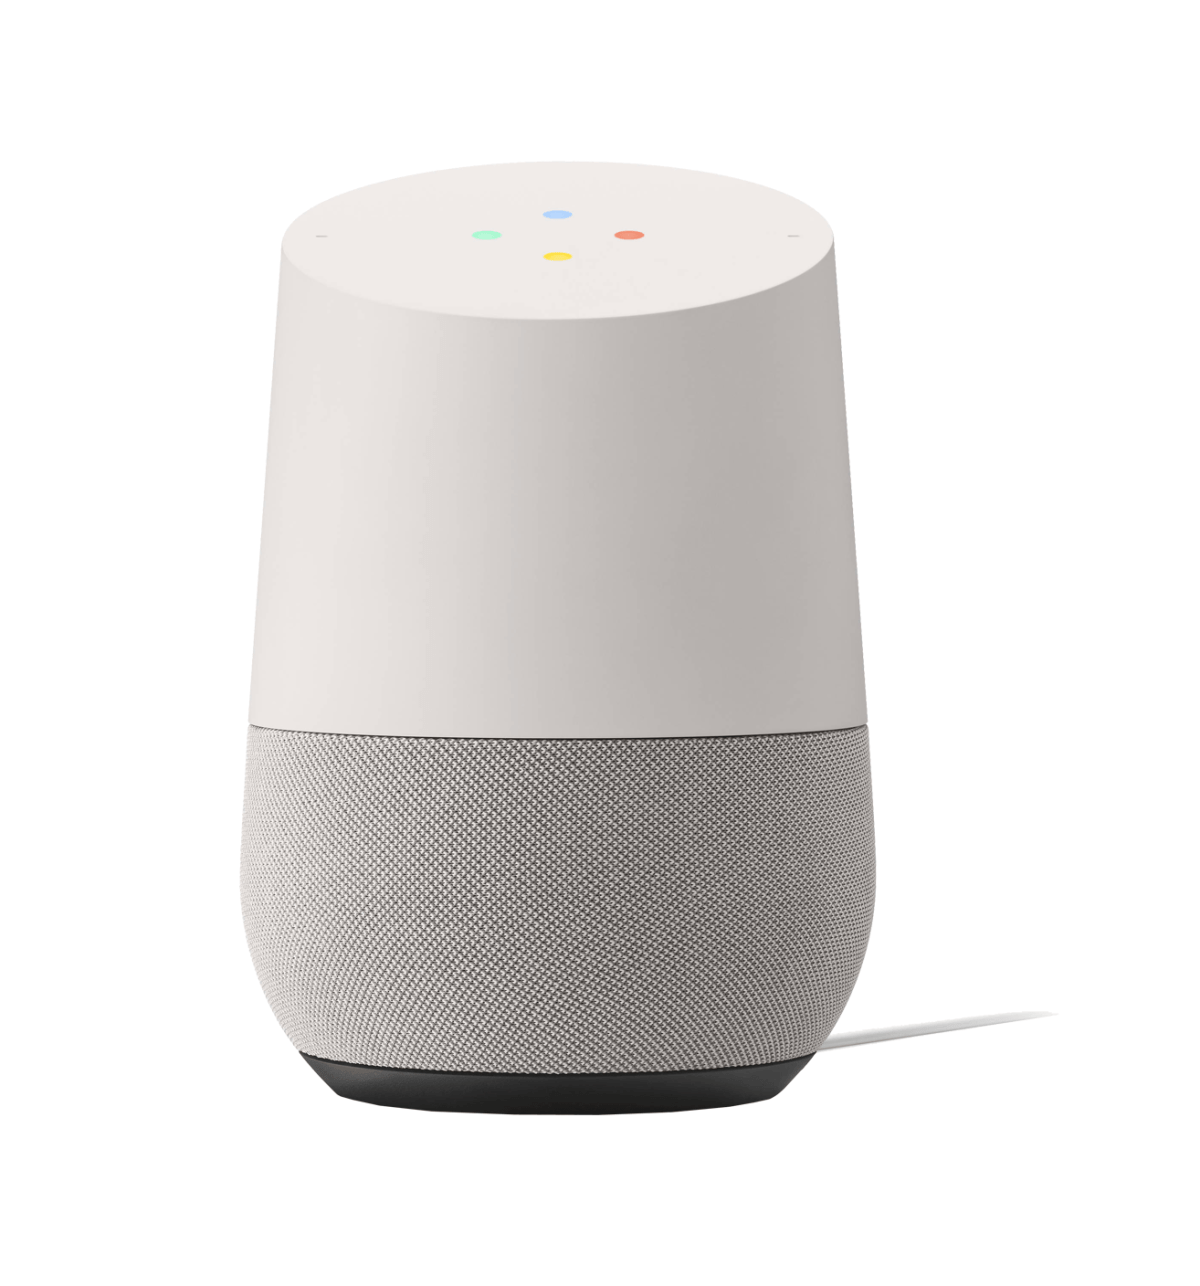 58A44Cad8F2A78.60159287 2 Google &Lt;Strong&Gt;Google Home White Slate Personal Assistant&Lt;/Strong&Gt; With Integrated Wifi Connectivity, Voice Recognition And Home Automation Support, The Google Home Wireless Speaker Will Connect To Your Wireless Network To Provide Control Of And Access To, Virtually All Of Your Smart Devices. It Can Play Music, Check The Weather And Traffic, Tell You Sports Scores, Control Your Smart Home Equipment And More. Using Far-Field Voice Recognition Technology And The Google Assistant, The Built-In Microphone Allows The Google Home To Recognize Your Voice And Perform The Requested Task In An Instant. You Can Control The Google Home By Voice, With The Google Home App, Or Use The Touch Surface On Top Of The Unit. Voice Control Can Be Disabled With The Rear-Mounted Mute Button. At Only 3.79-Inches Wide And 5.62-Inches Tall, The Google Home Is Designed To Fit Nearly Anywhere In Most Decors. To Further Blend Into Your Home, The Slate Fabric Base Is Interchangeable With Six Separately Available Colors. Google Home White Slate Personal Assistant Google Home White Slate Personal Assistant